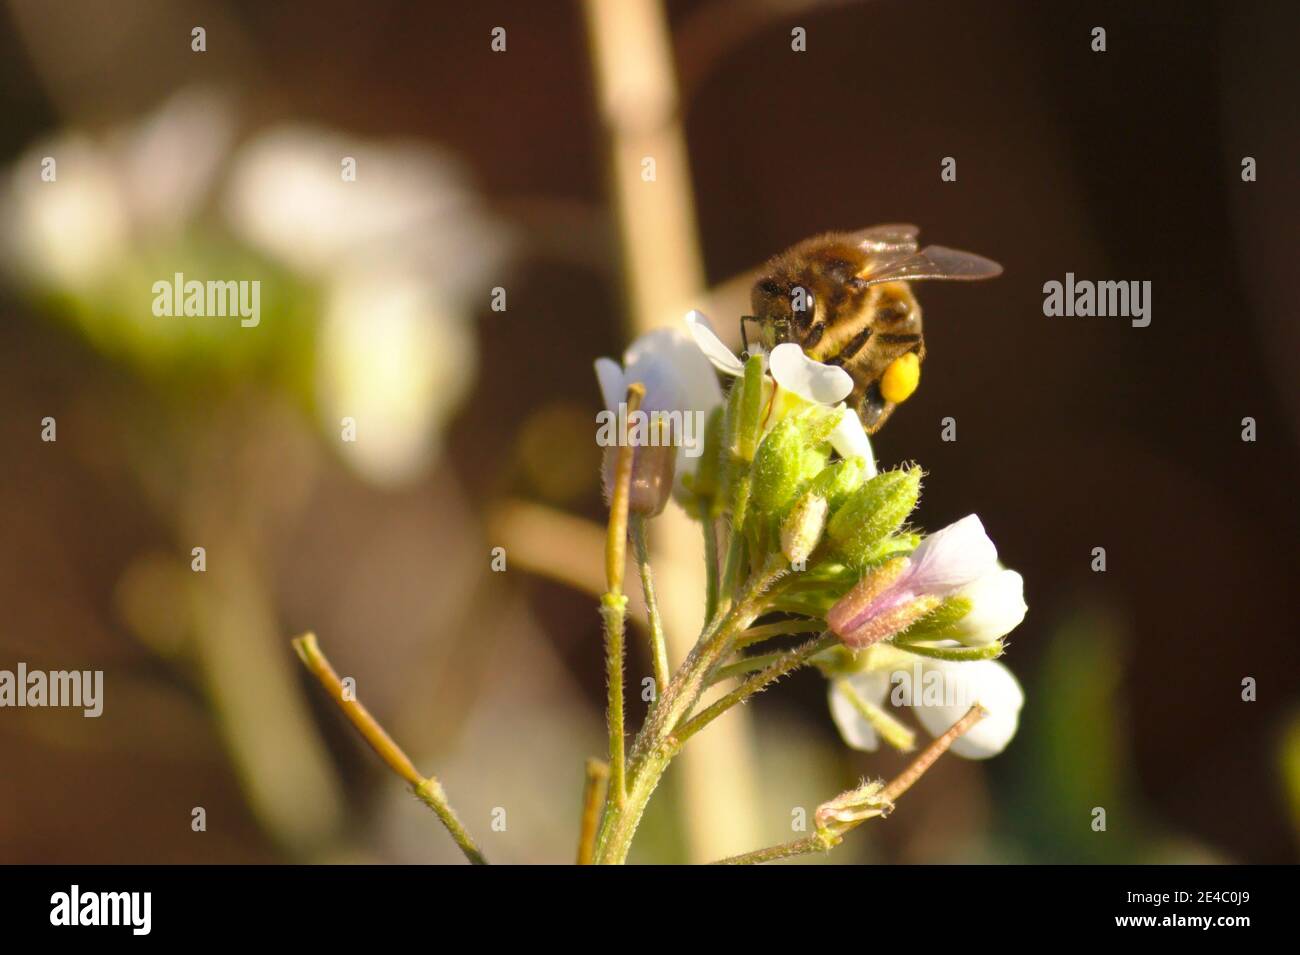 Closeup of a bee looking for nectar from the white flowers of an Arabidopsis, caterpillar (Arabidopsis thaliana) Stock Photo